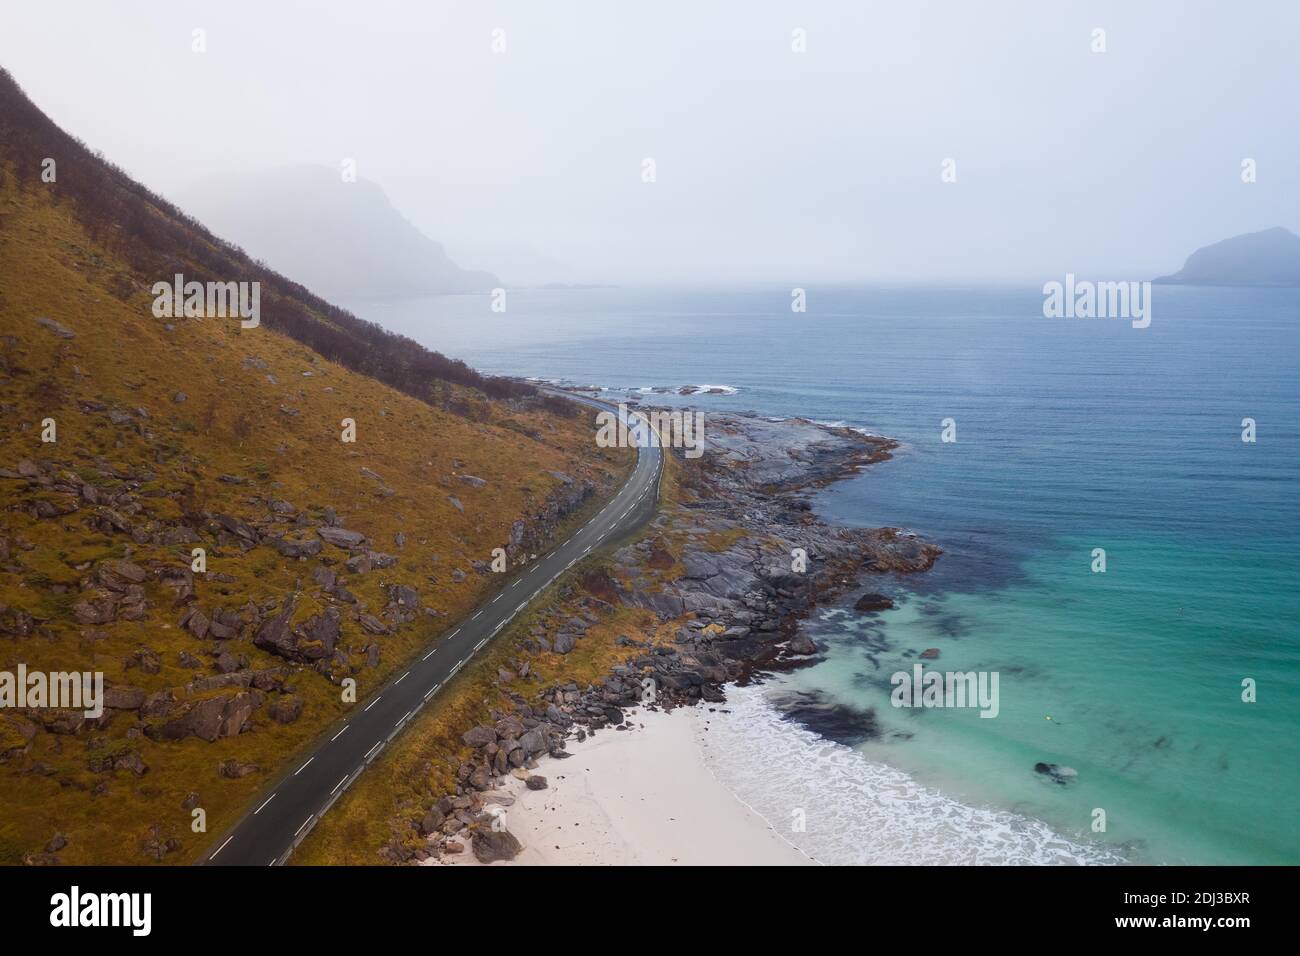 Drone shot, road between a mountain and in front of a fine sandy beach, Haukland beach, Lofoten, Norway Stock Photo